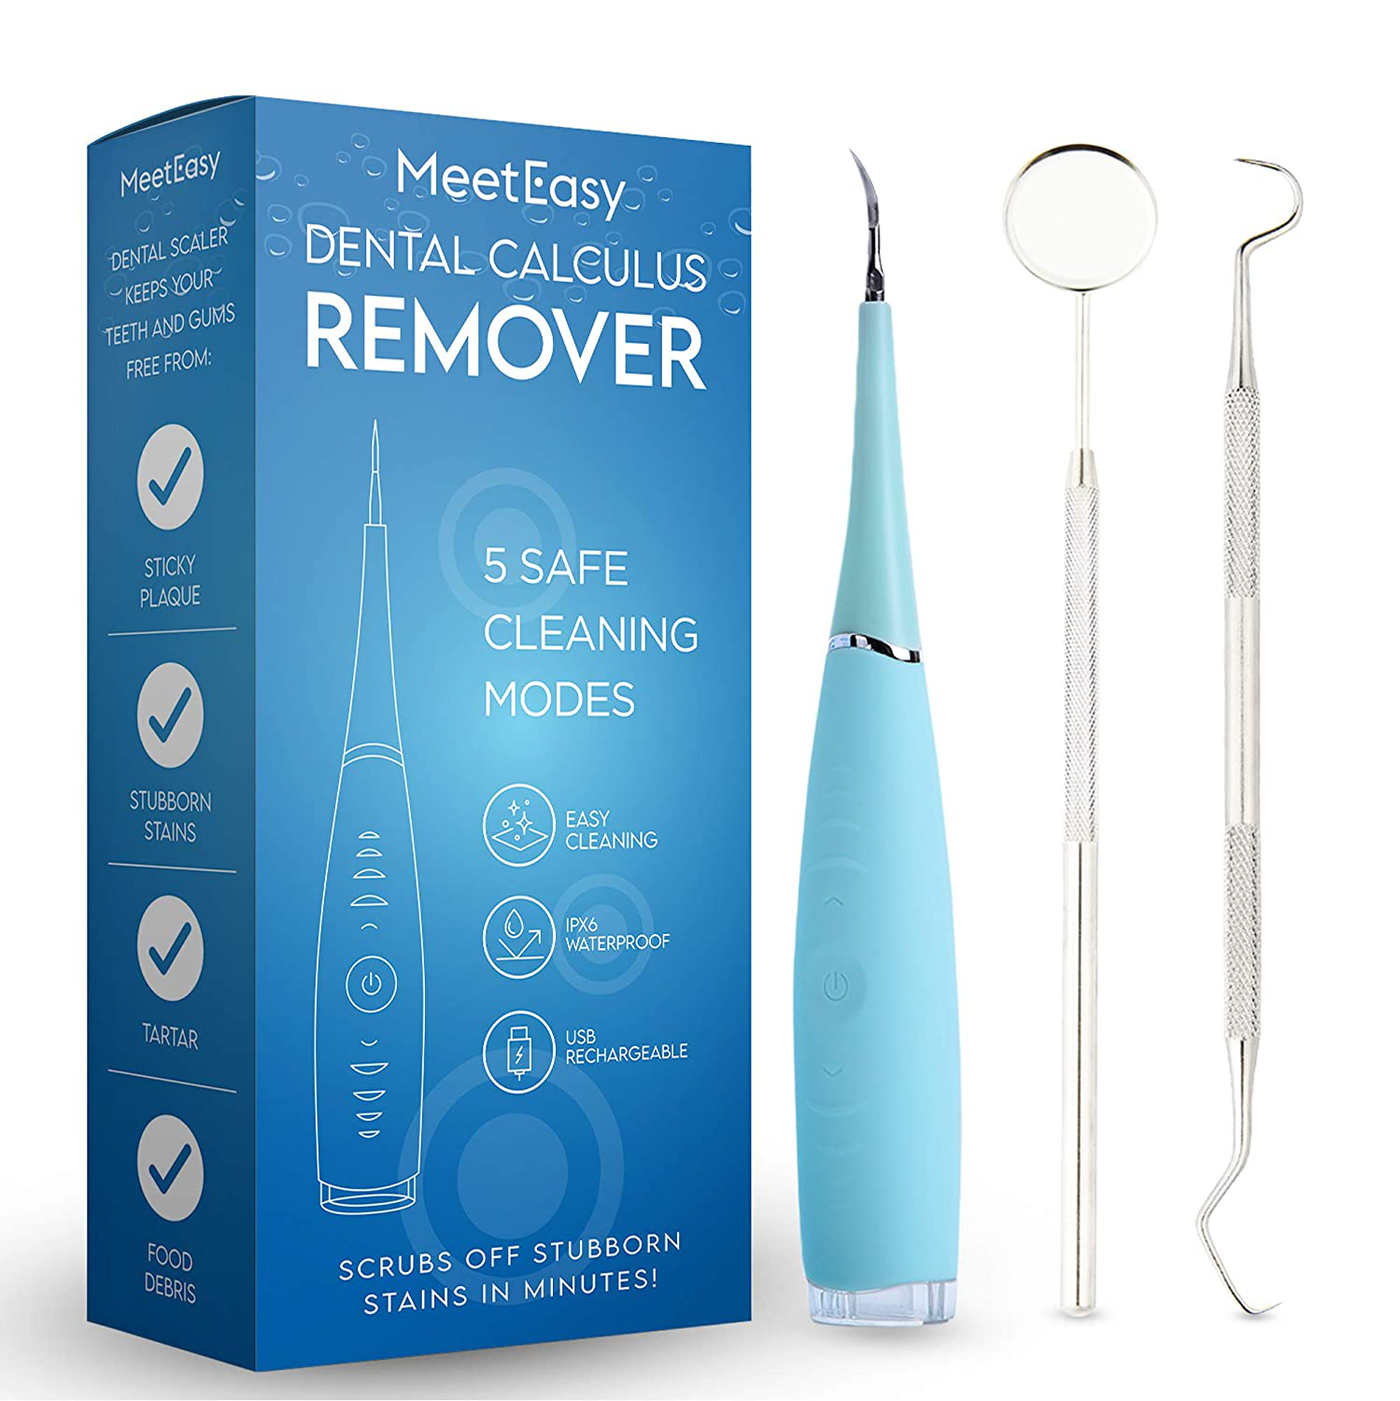 Meeteasy Dental Calculus Plaque Remover Tool Kit - Tooth Scraper Tartar Removal Cleaner - Remove Teeth Stain Tarter for Adult - 100% Proven Safe